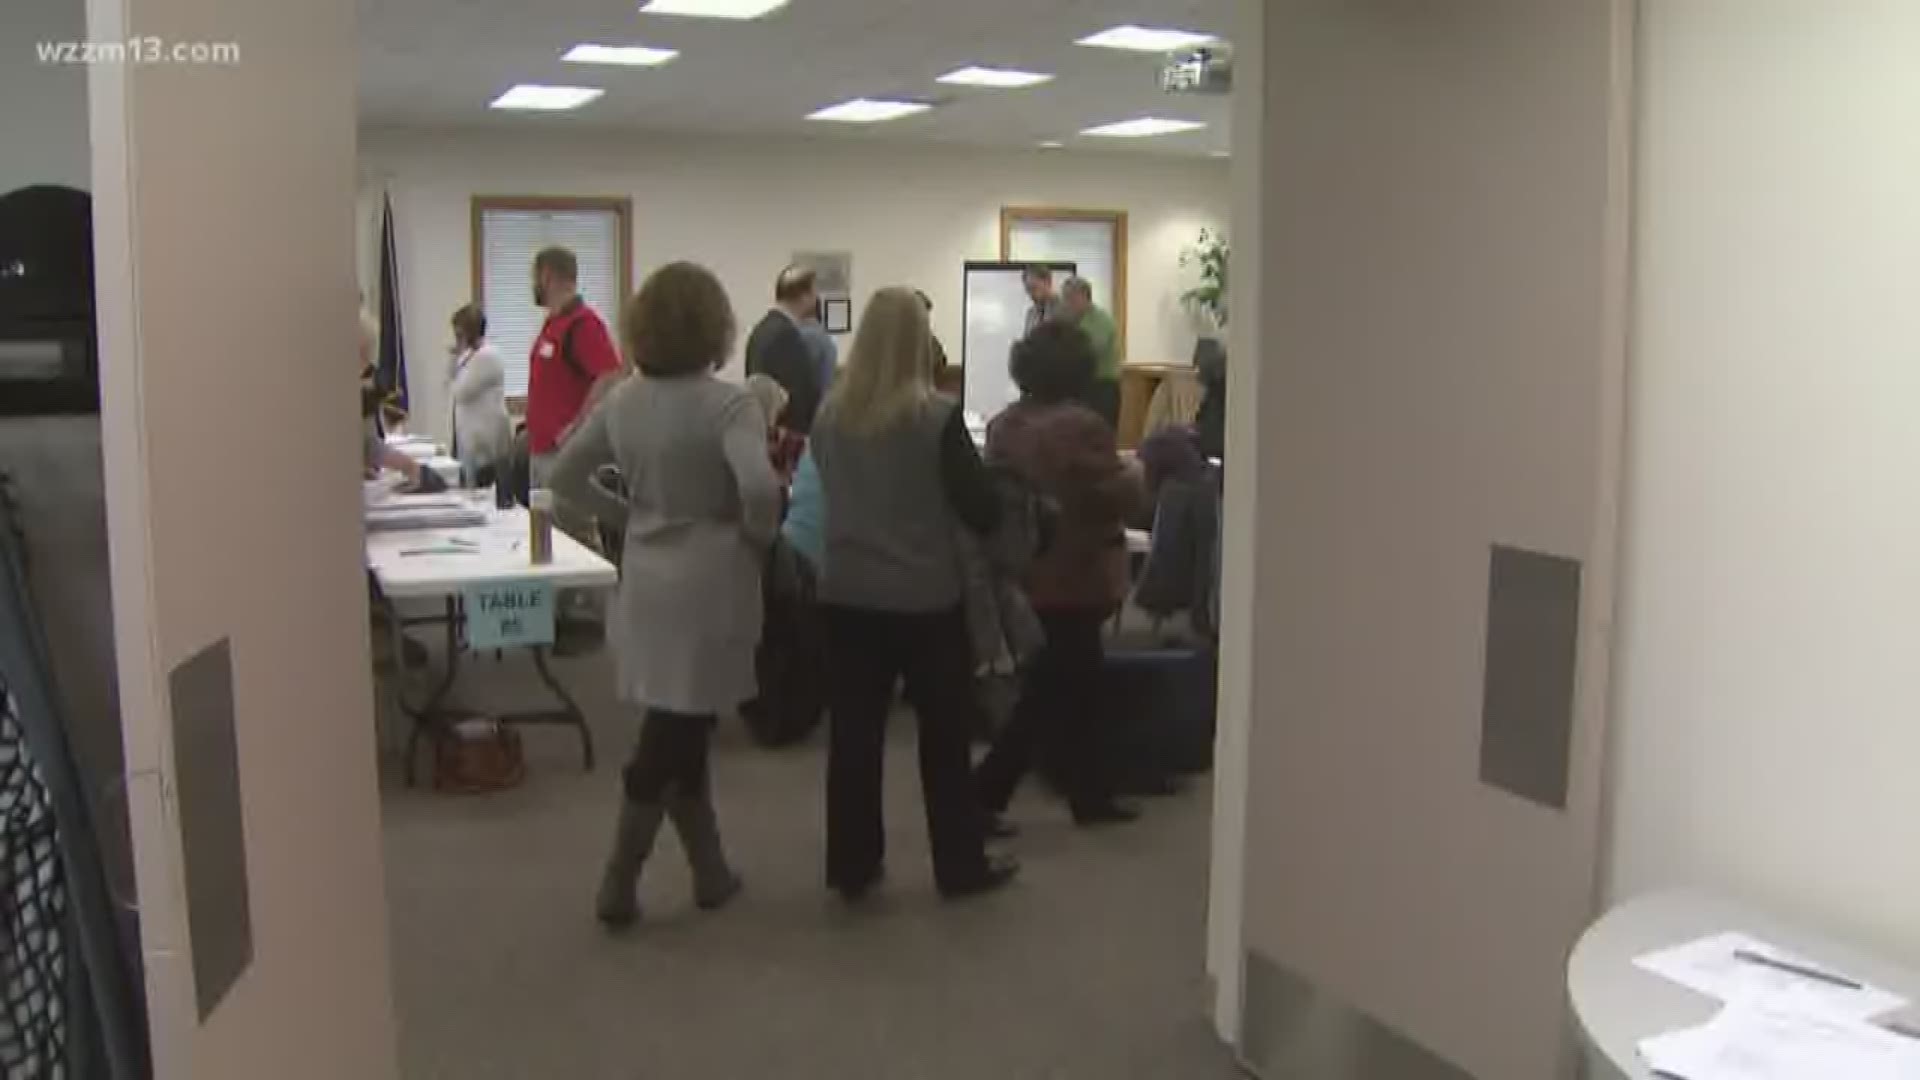 School millage passes after recount